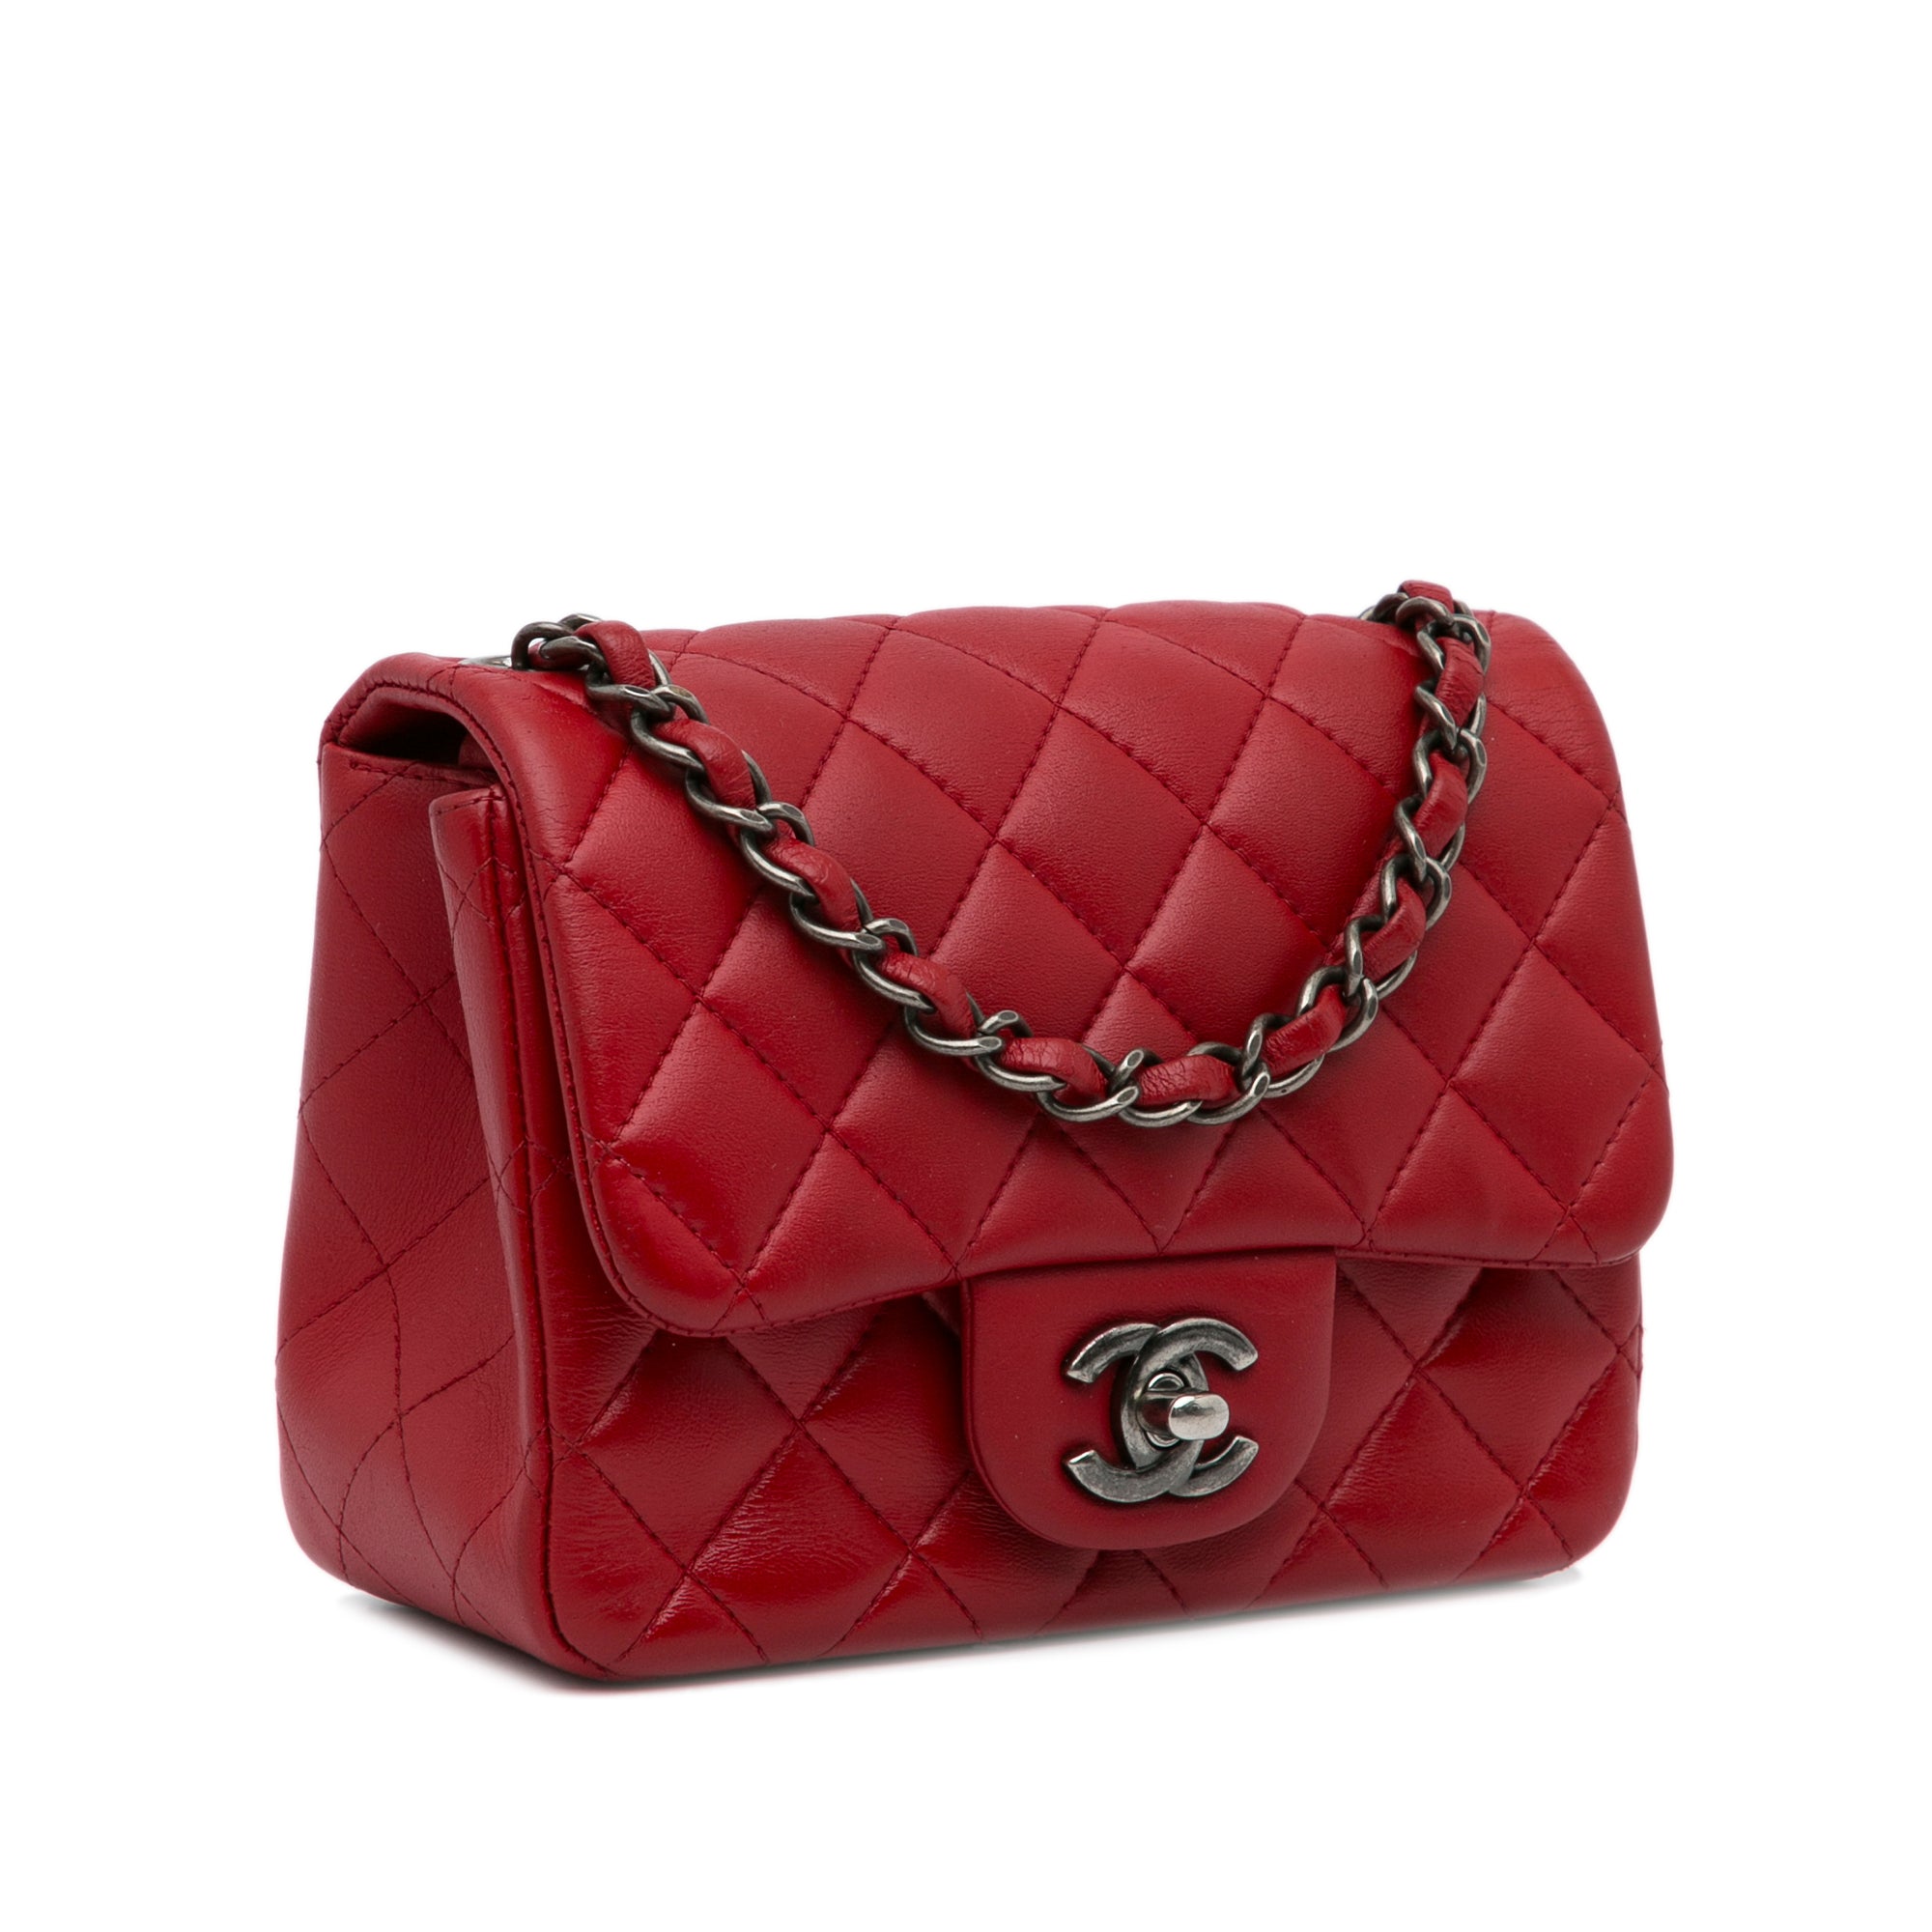 My Sister's Closet | Chanel Chanel Jumbo Red Lambskin Double Flap Bag